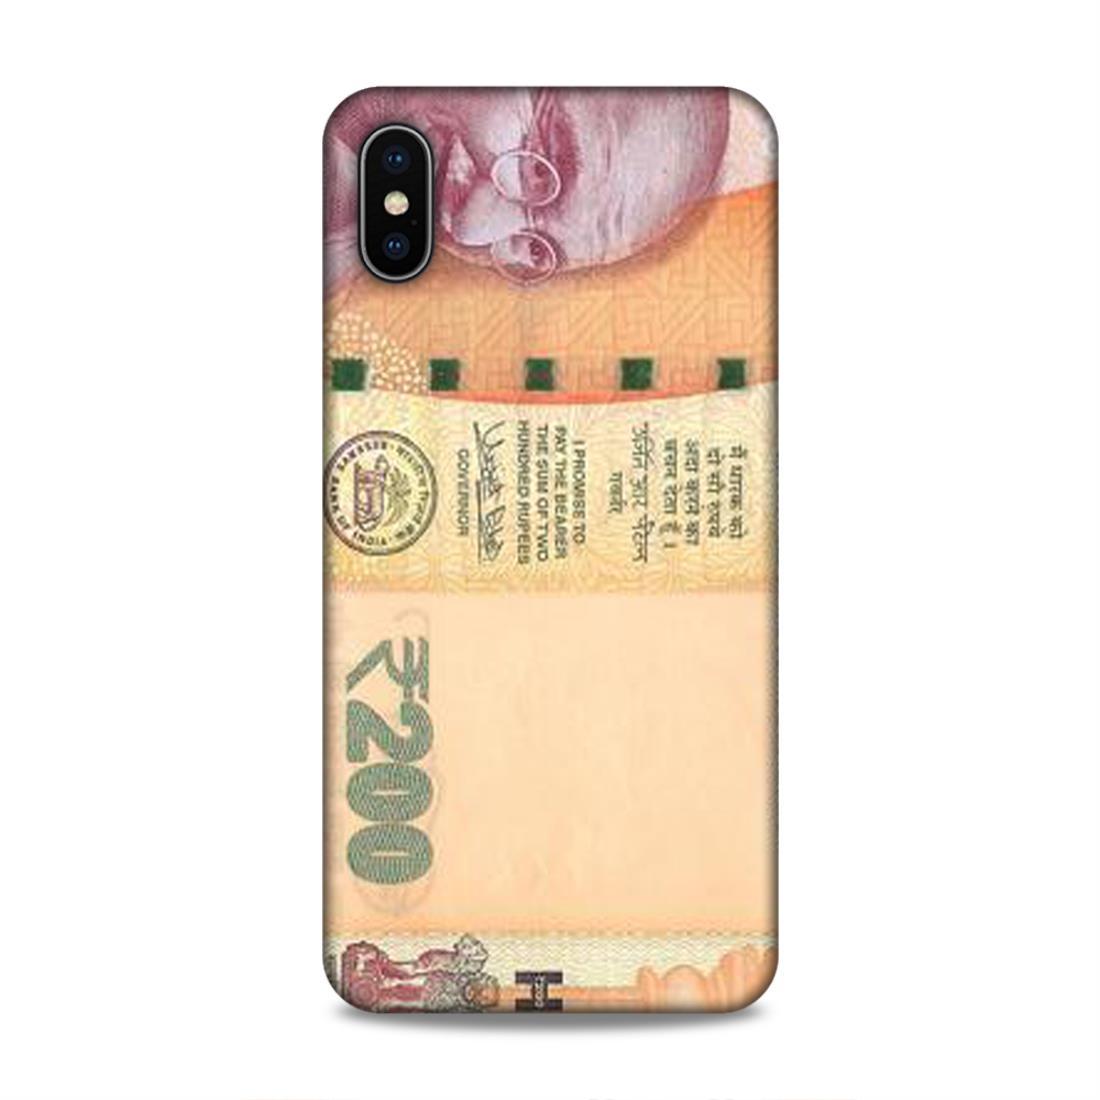 Rs 200 Currency Note iPhone XS Max Phone Case Cover